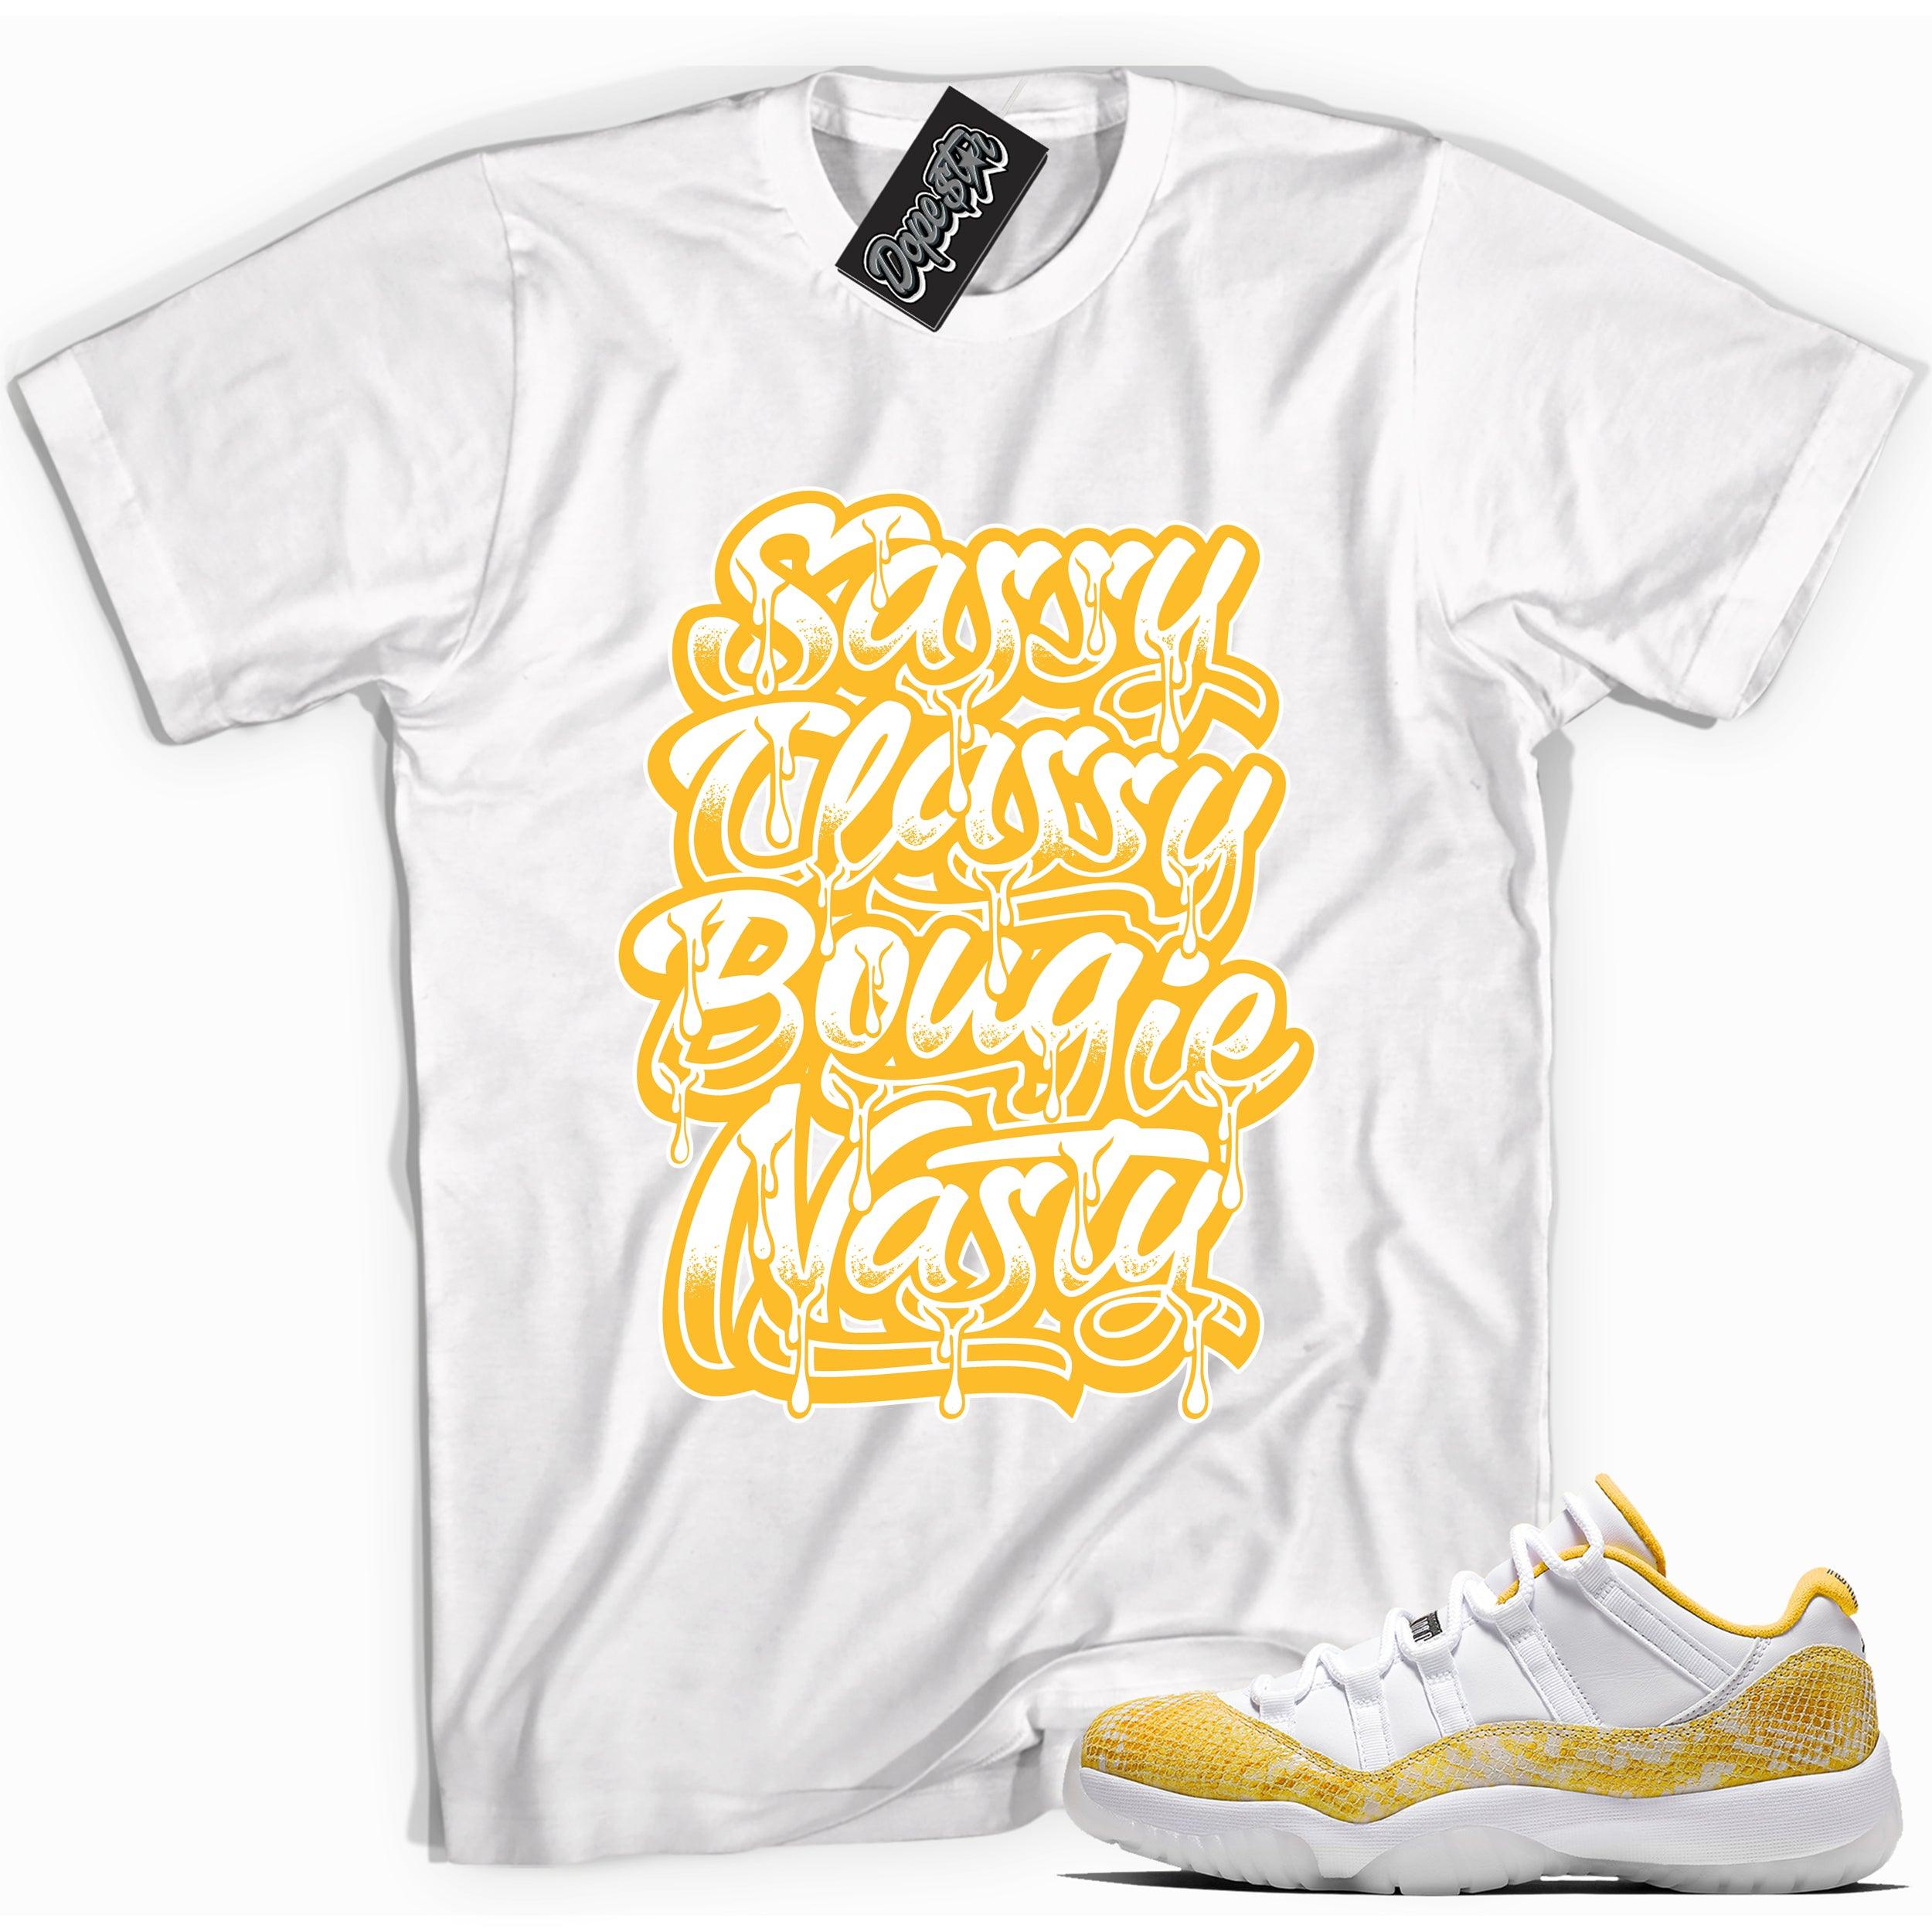 Cool white graphic tee with 'sassy classy bougie nasty' print, that perfectly matches Air Jordan 11 Retro Low Yellow Snakeskin sneakers